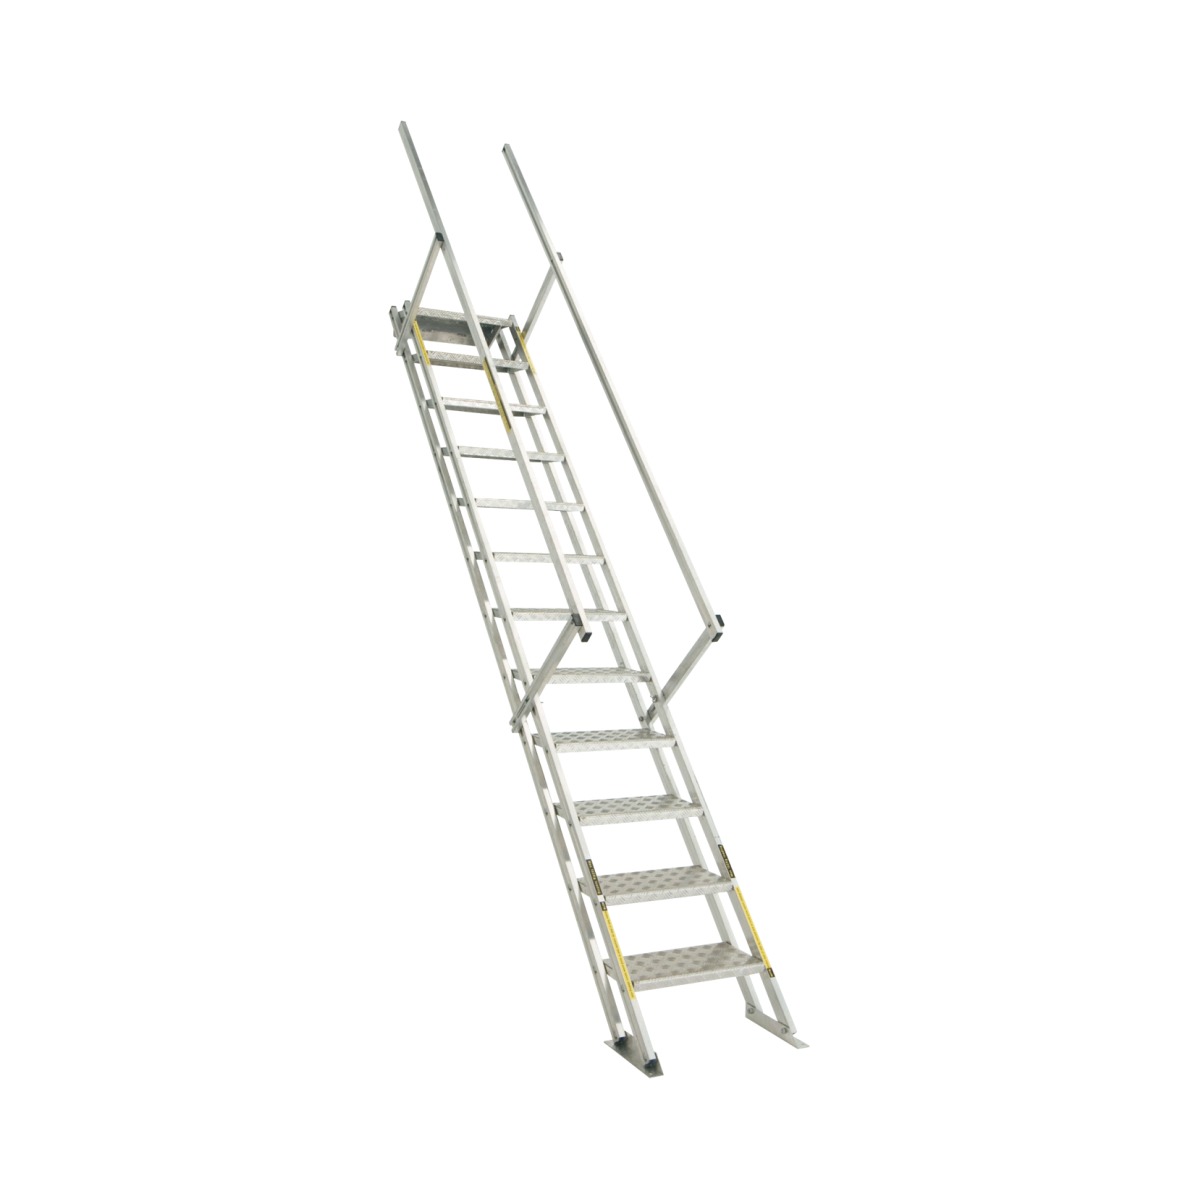 Buy Self-Levelling Stairs - Fixed in Stairs and Truck Access from Easy Access available at Astrolift NZ